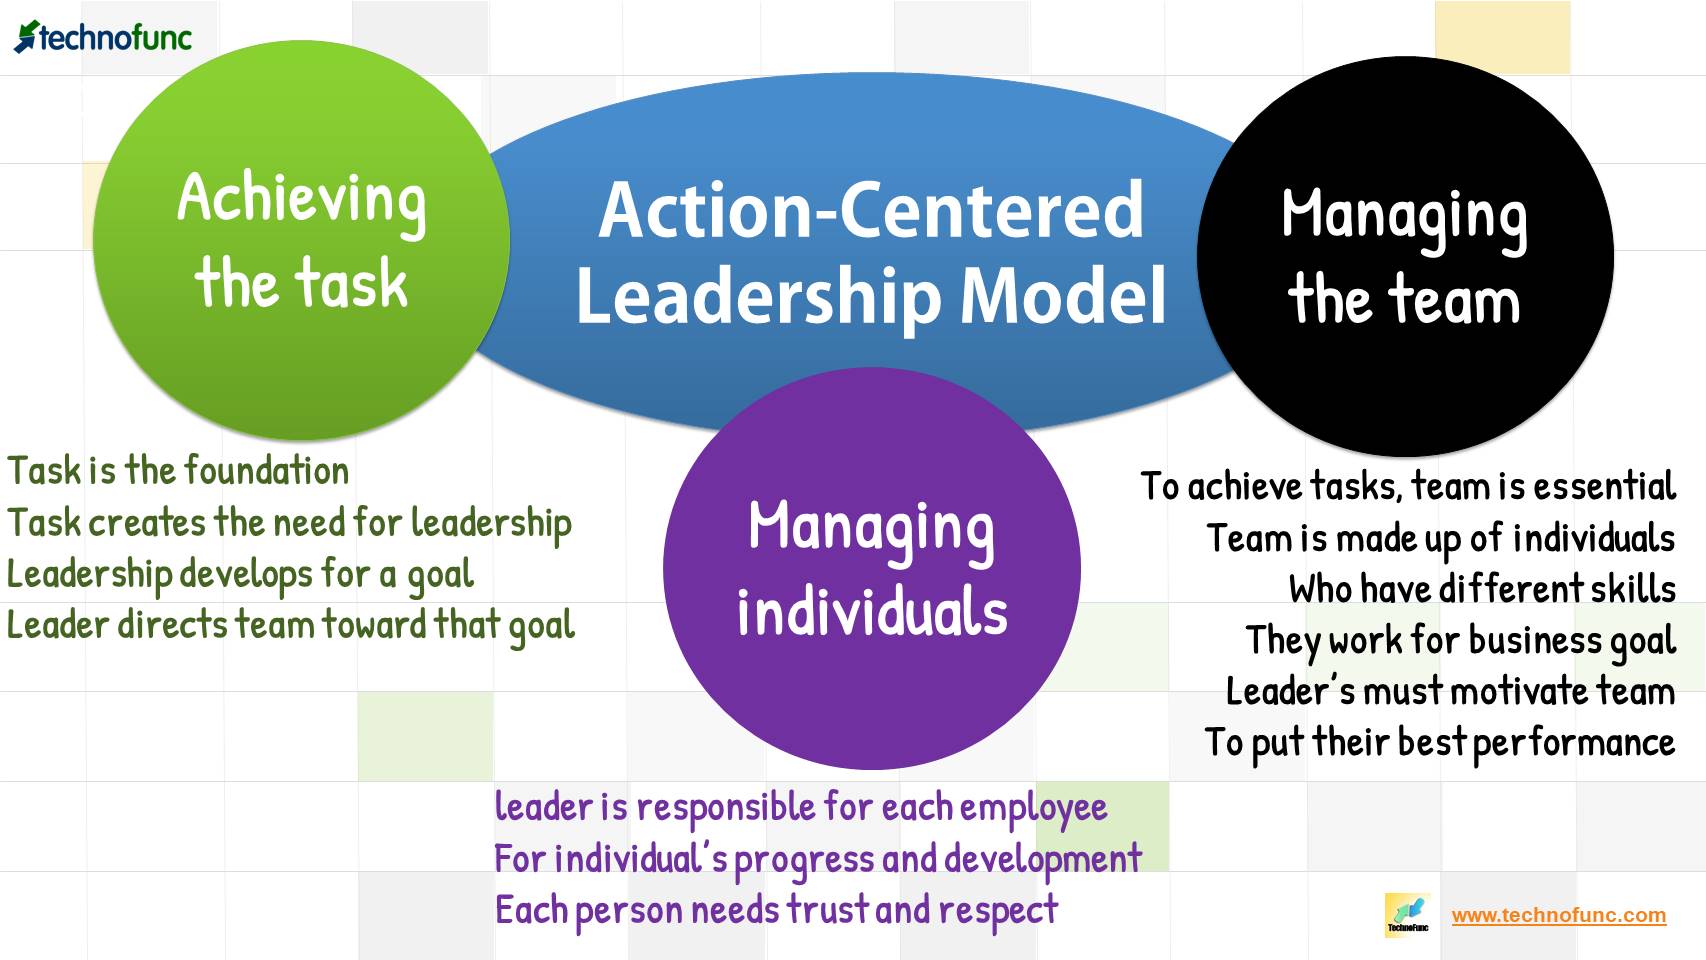 Action-Centered Leadership